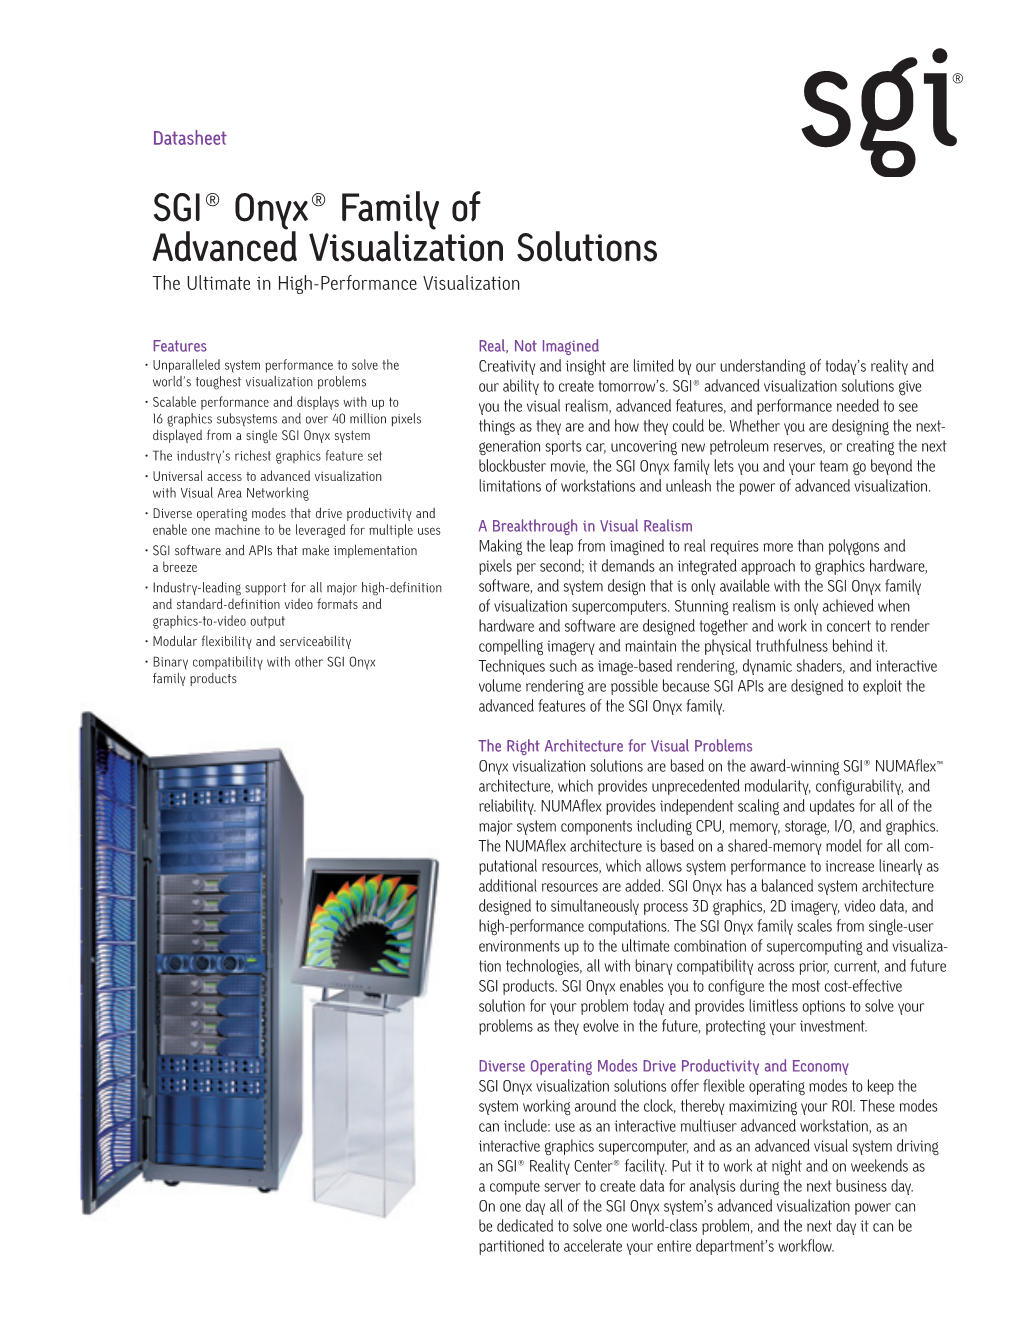 SGI® Onyx® Family of Advanced Visualization Solutions the Ultimate in High-Performance Visualization